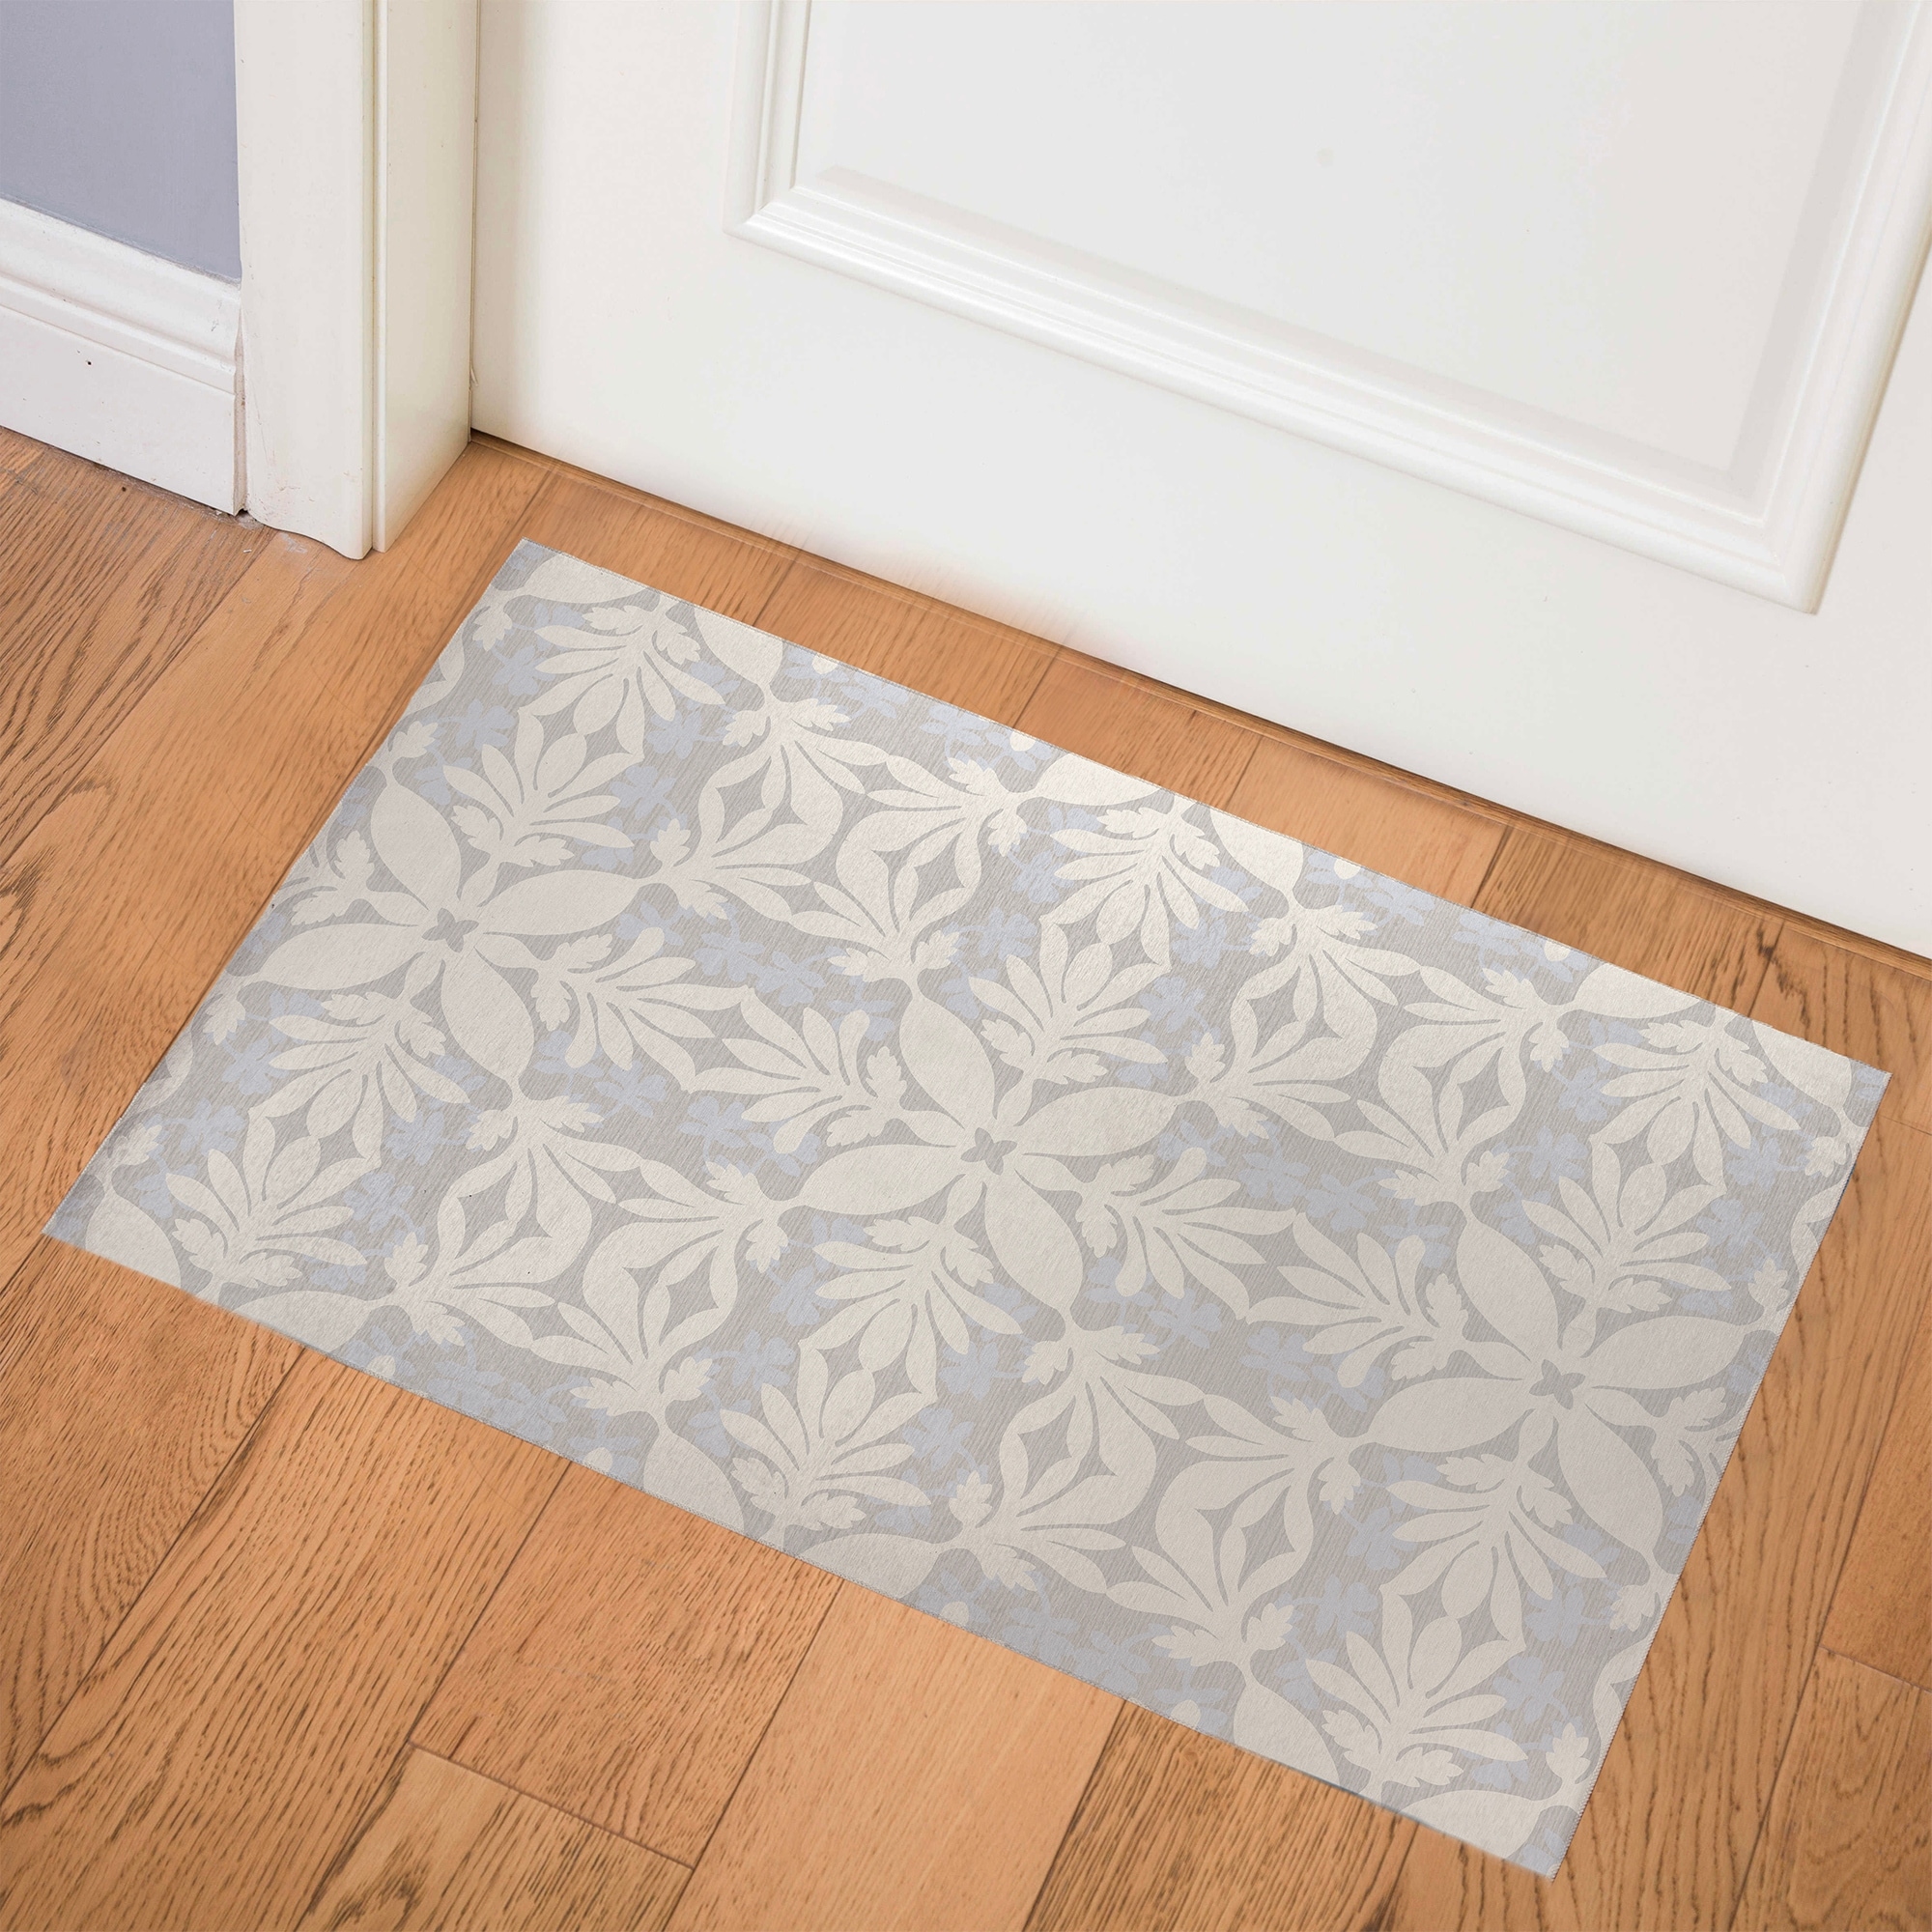 https://ak1.ostkcdn.com/images/products/is/images/direct/346248f58160d432b3caead195cf5909cfff3b51/ALOHA-Indoor-Floor-Mat-By-Kavka-Designs.jpg